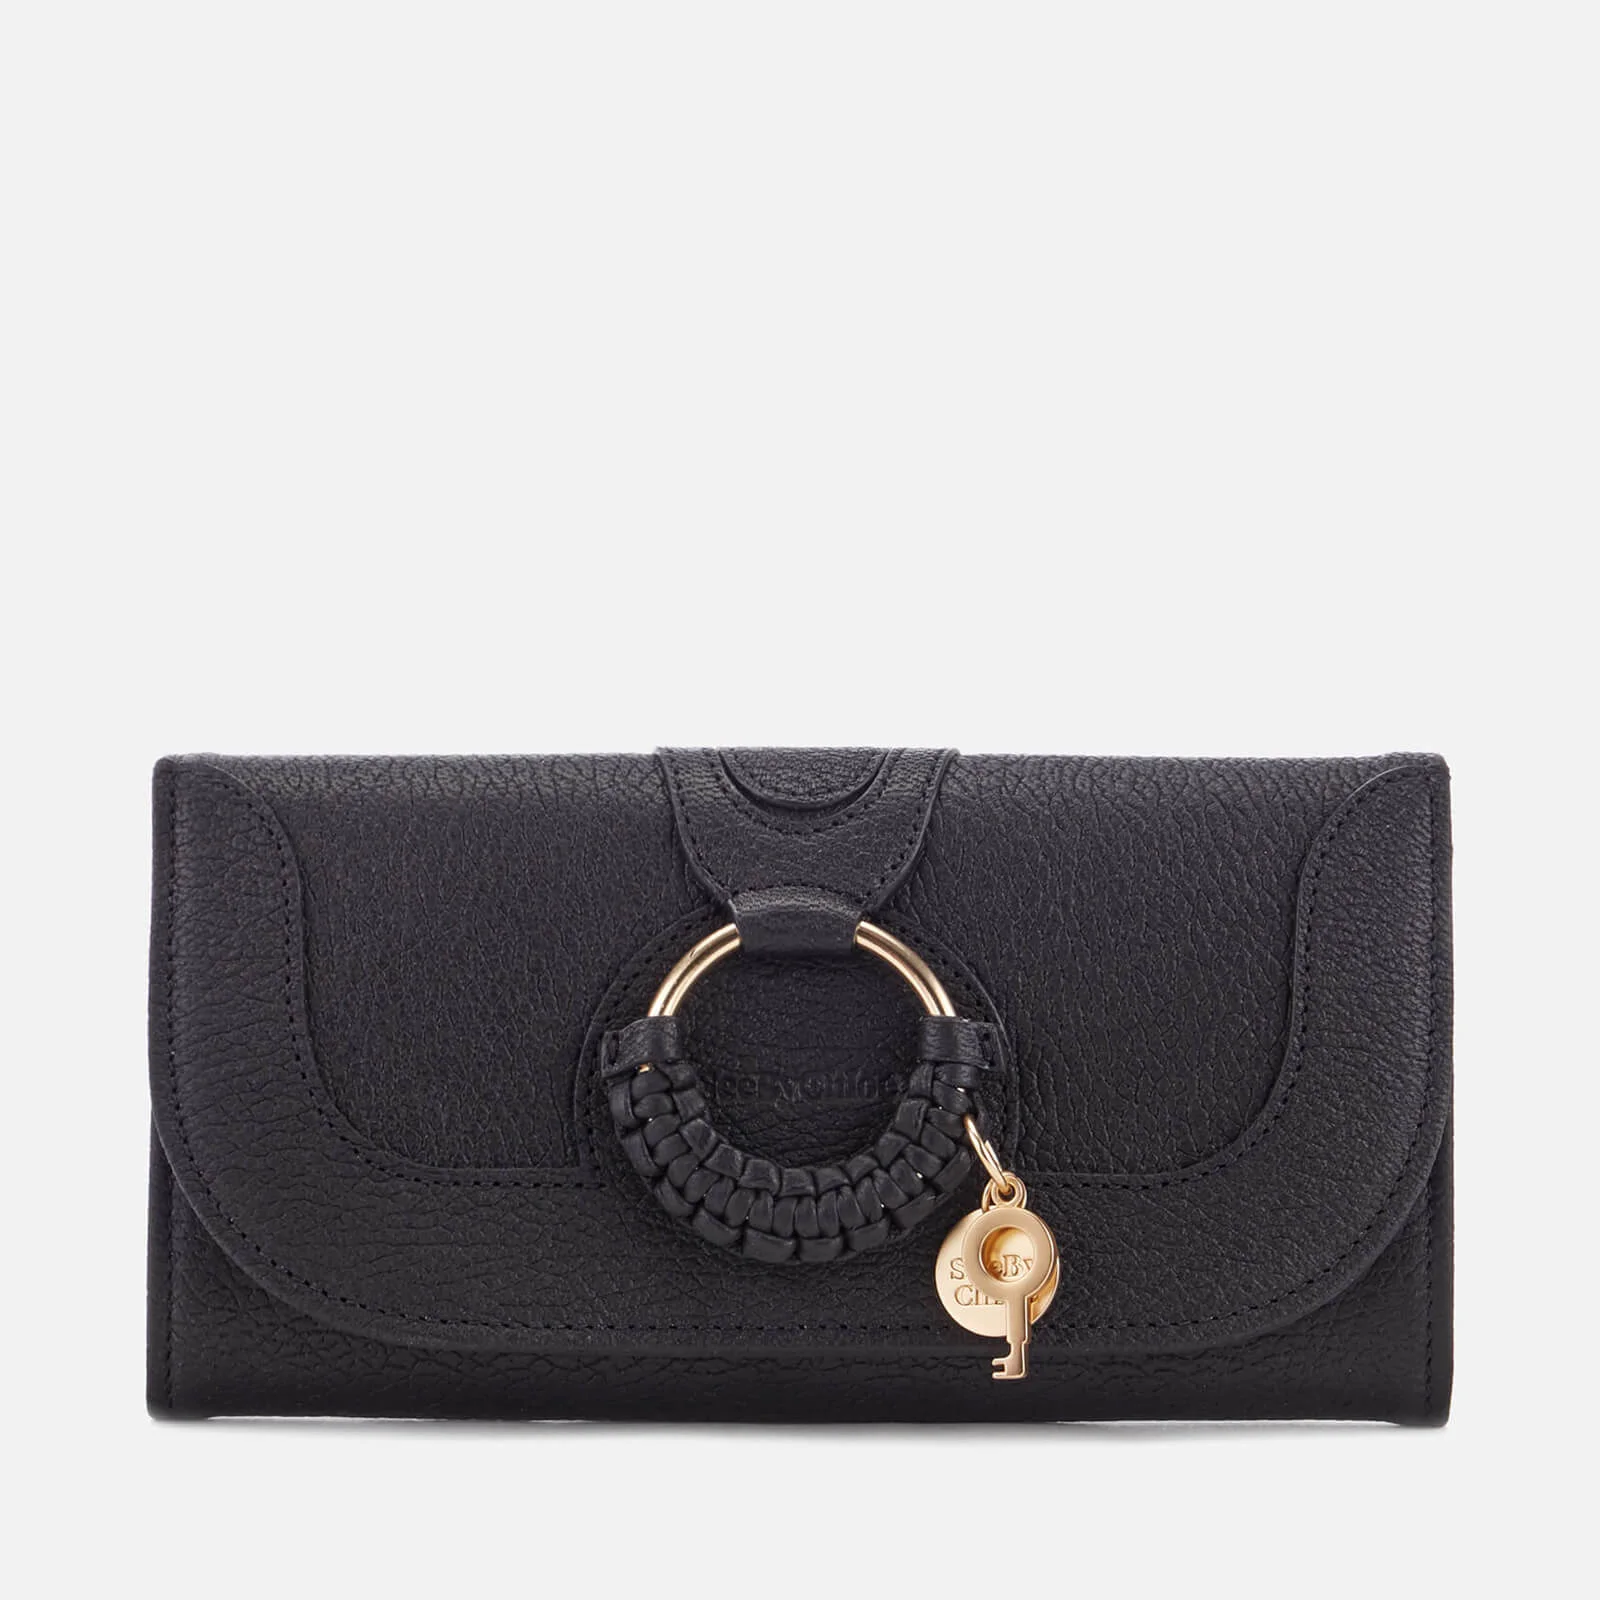 See by Chloé Women's Hana Large Wallet - Black Image 1